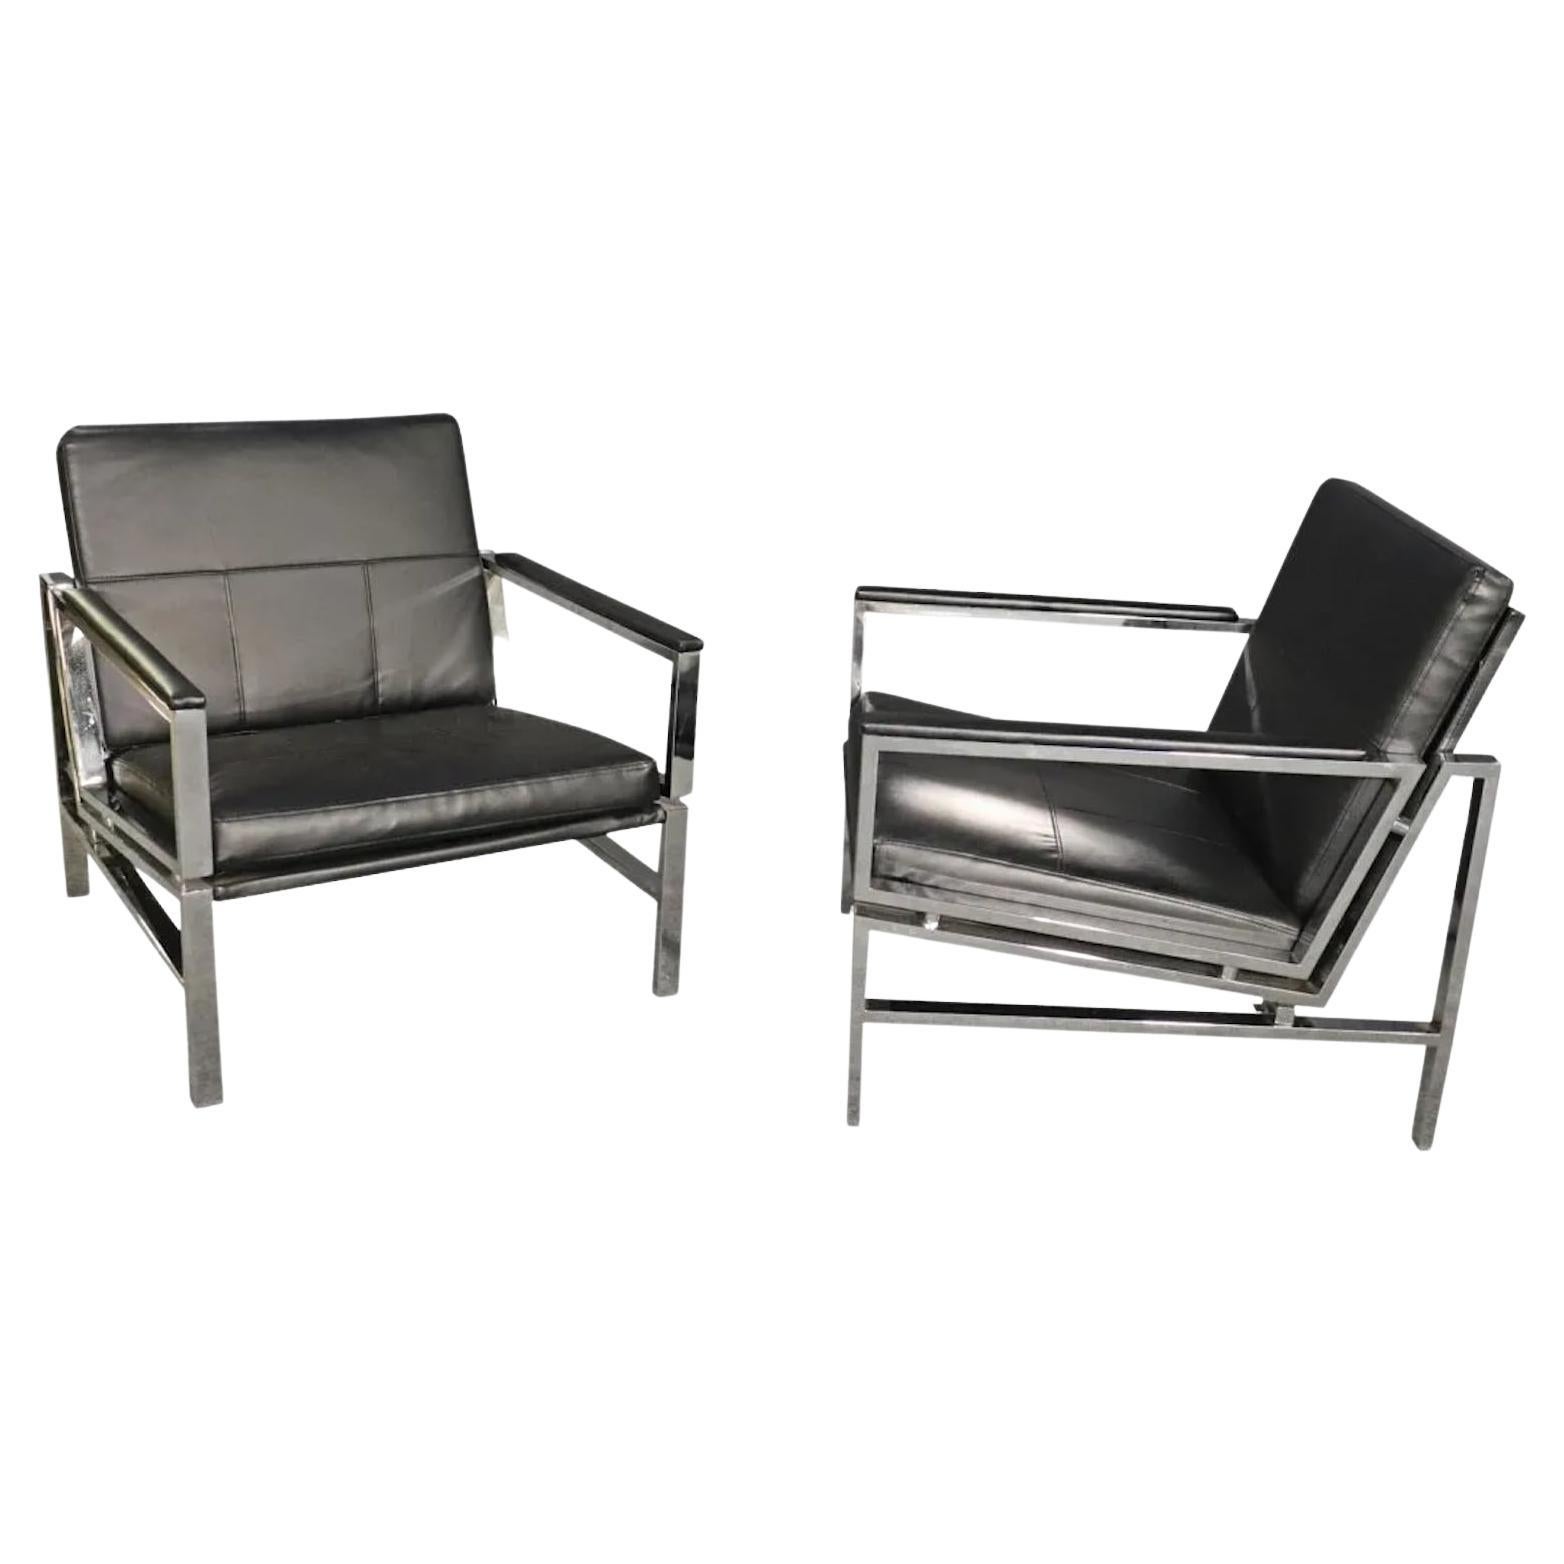 Pair Mid-Century Style Chrome Chairs For Sale